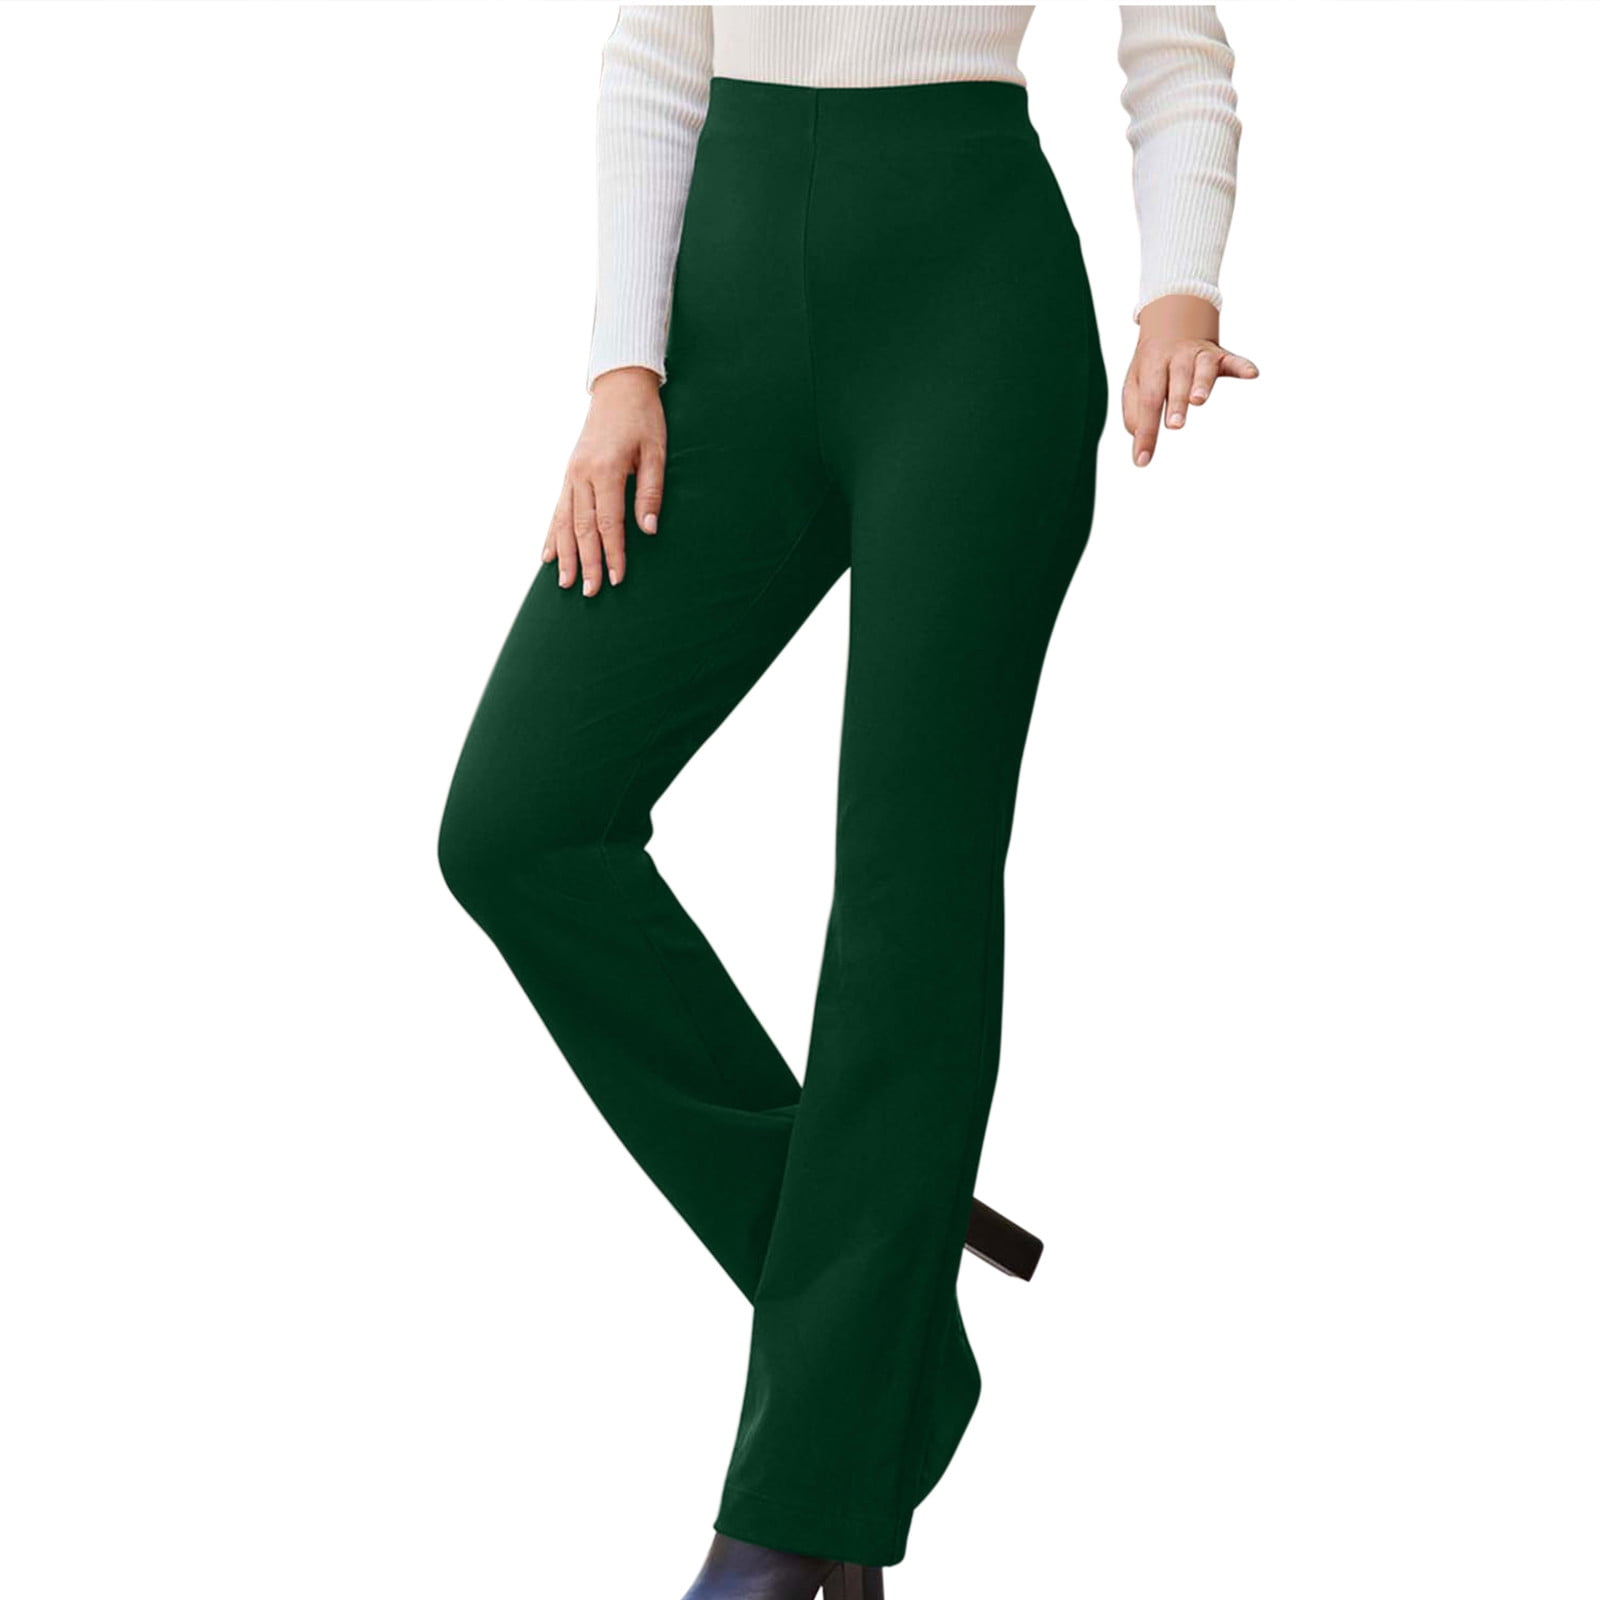 SSAAVKUY Womens Slim Fit Flare Solid Suit Pants Leisure Trousers  Bell-bottoms Solid Color Pants Comfy Holiday Cool Girl Dressy Fashion  Bottoms Green 4 - Walmart.com